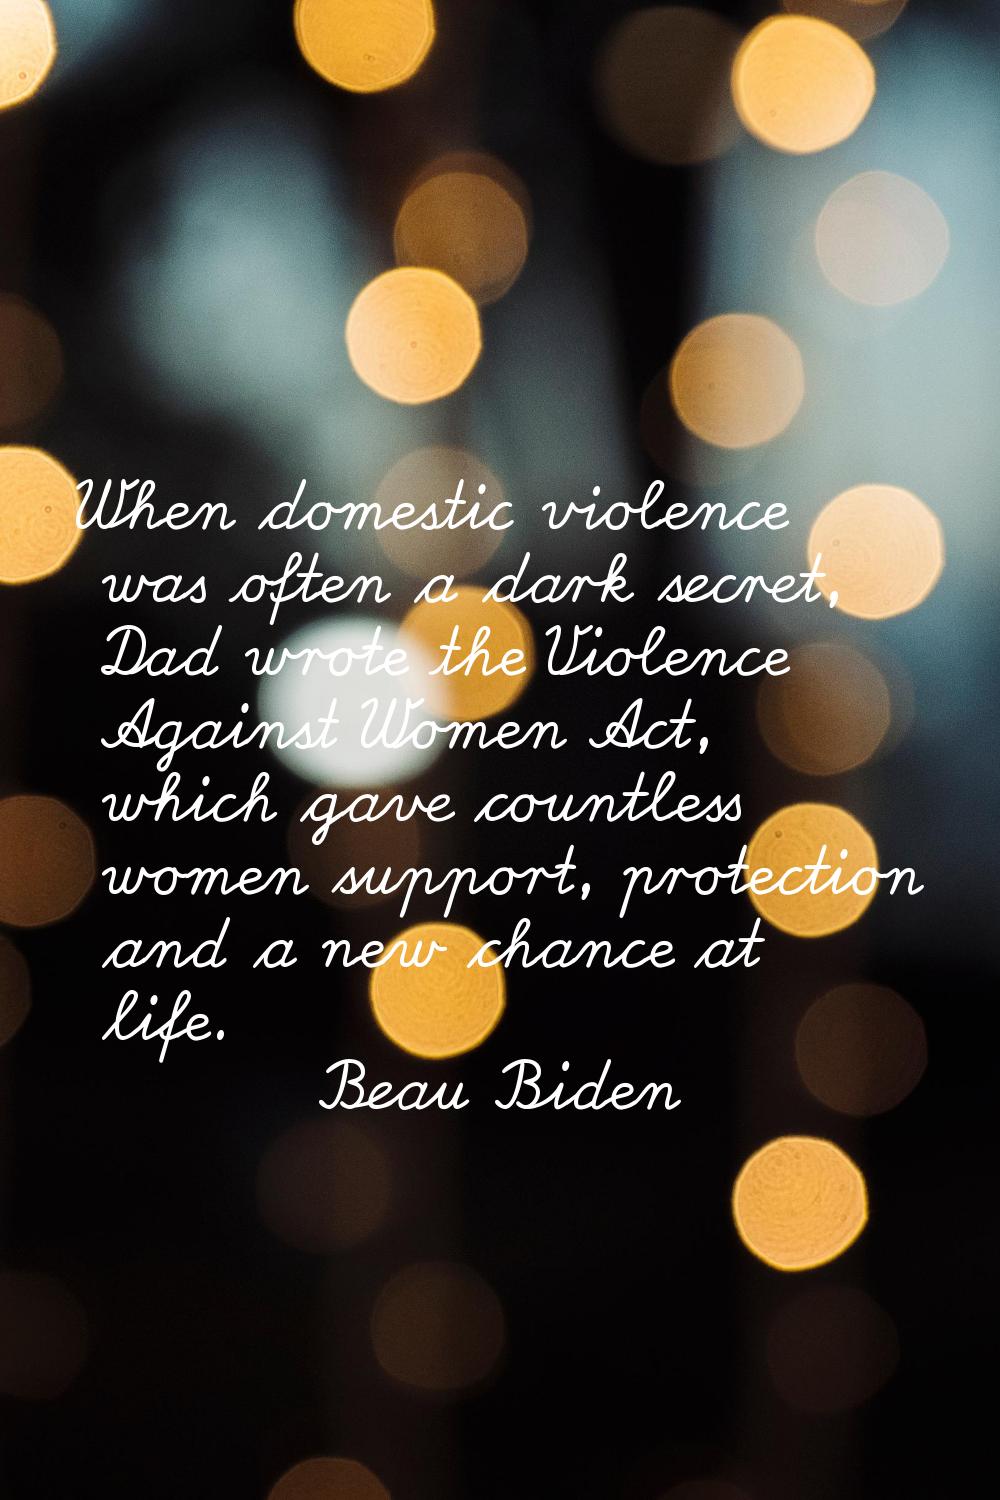 When domestic violence was often a dark secret, Dad wrote the Violence Against Women Act, which gav